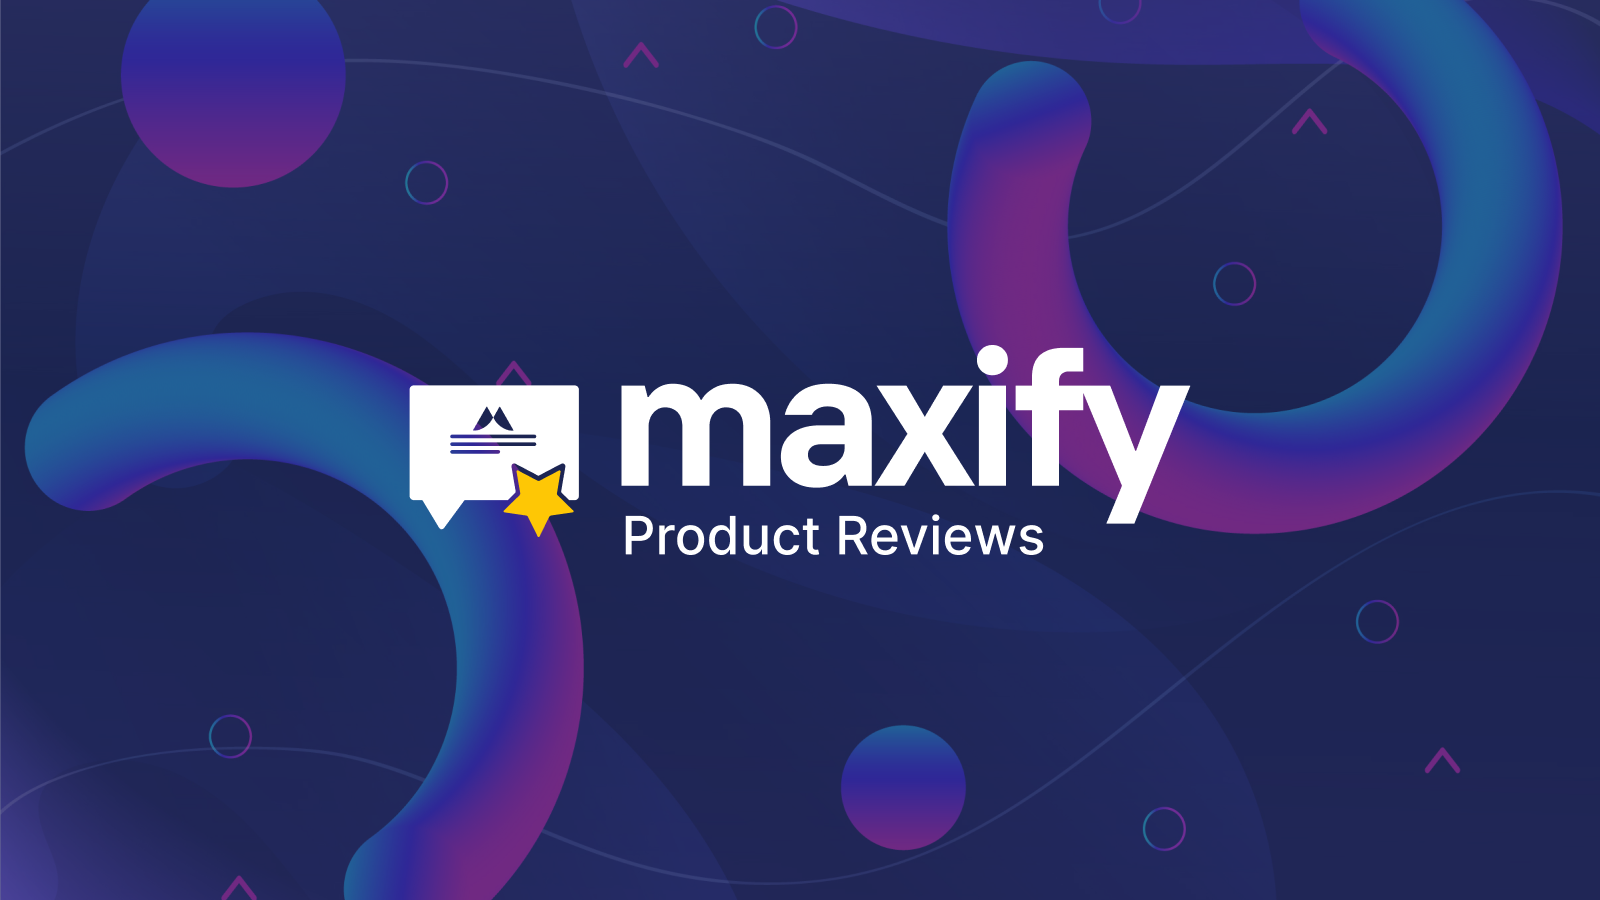 Maxify Product Reviews featured image